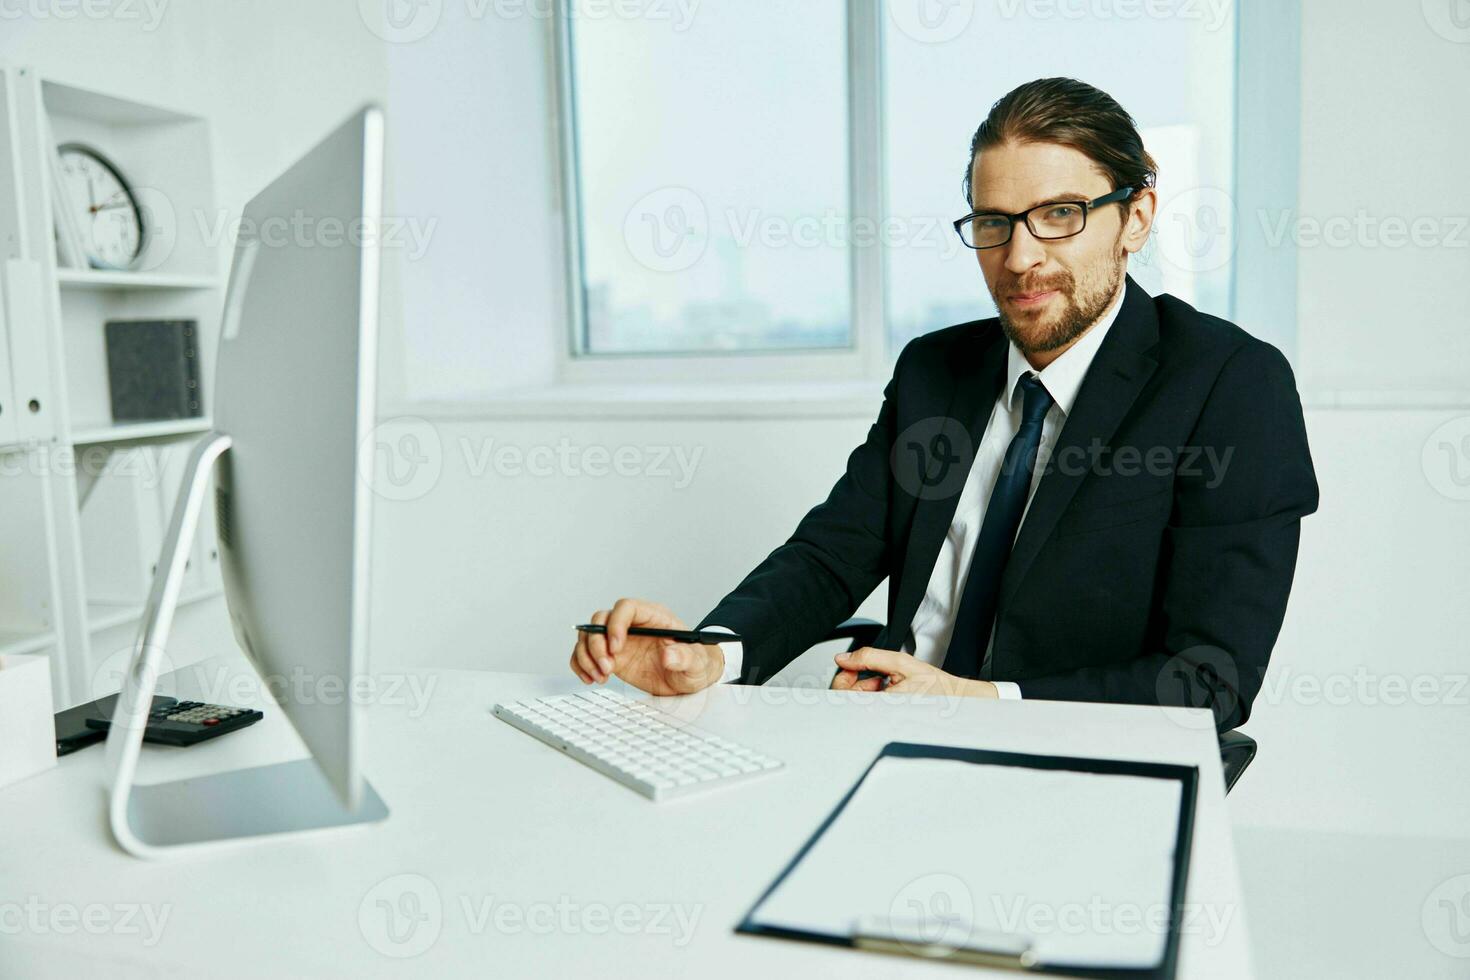 businessman documents in hand communication by phone Lifestyle photo